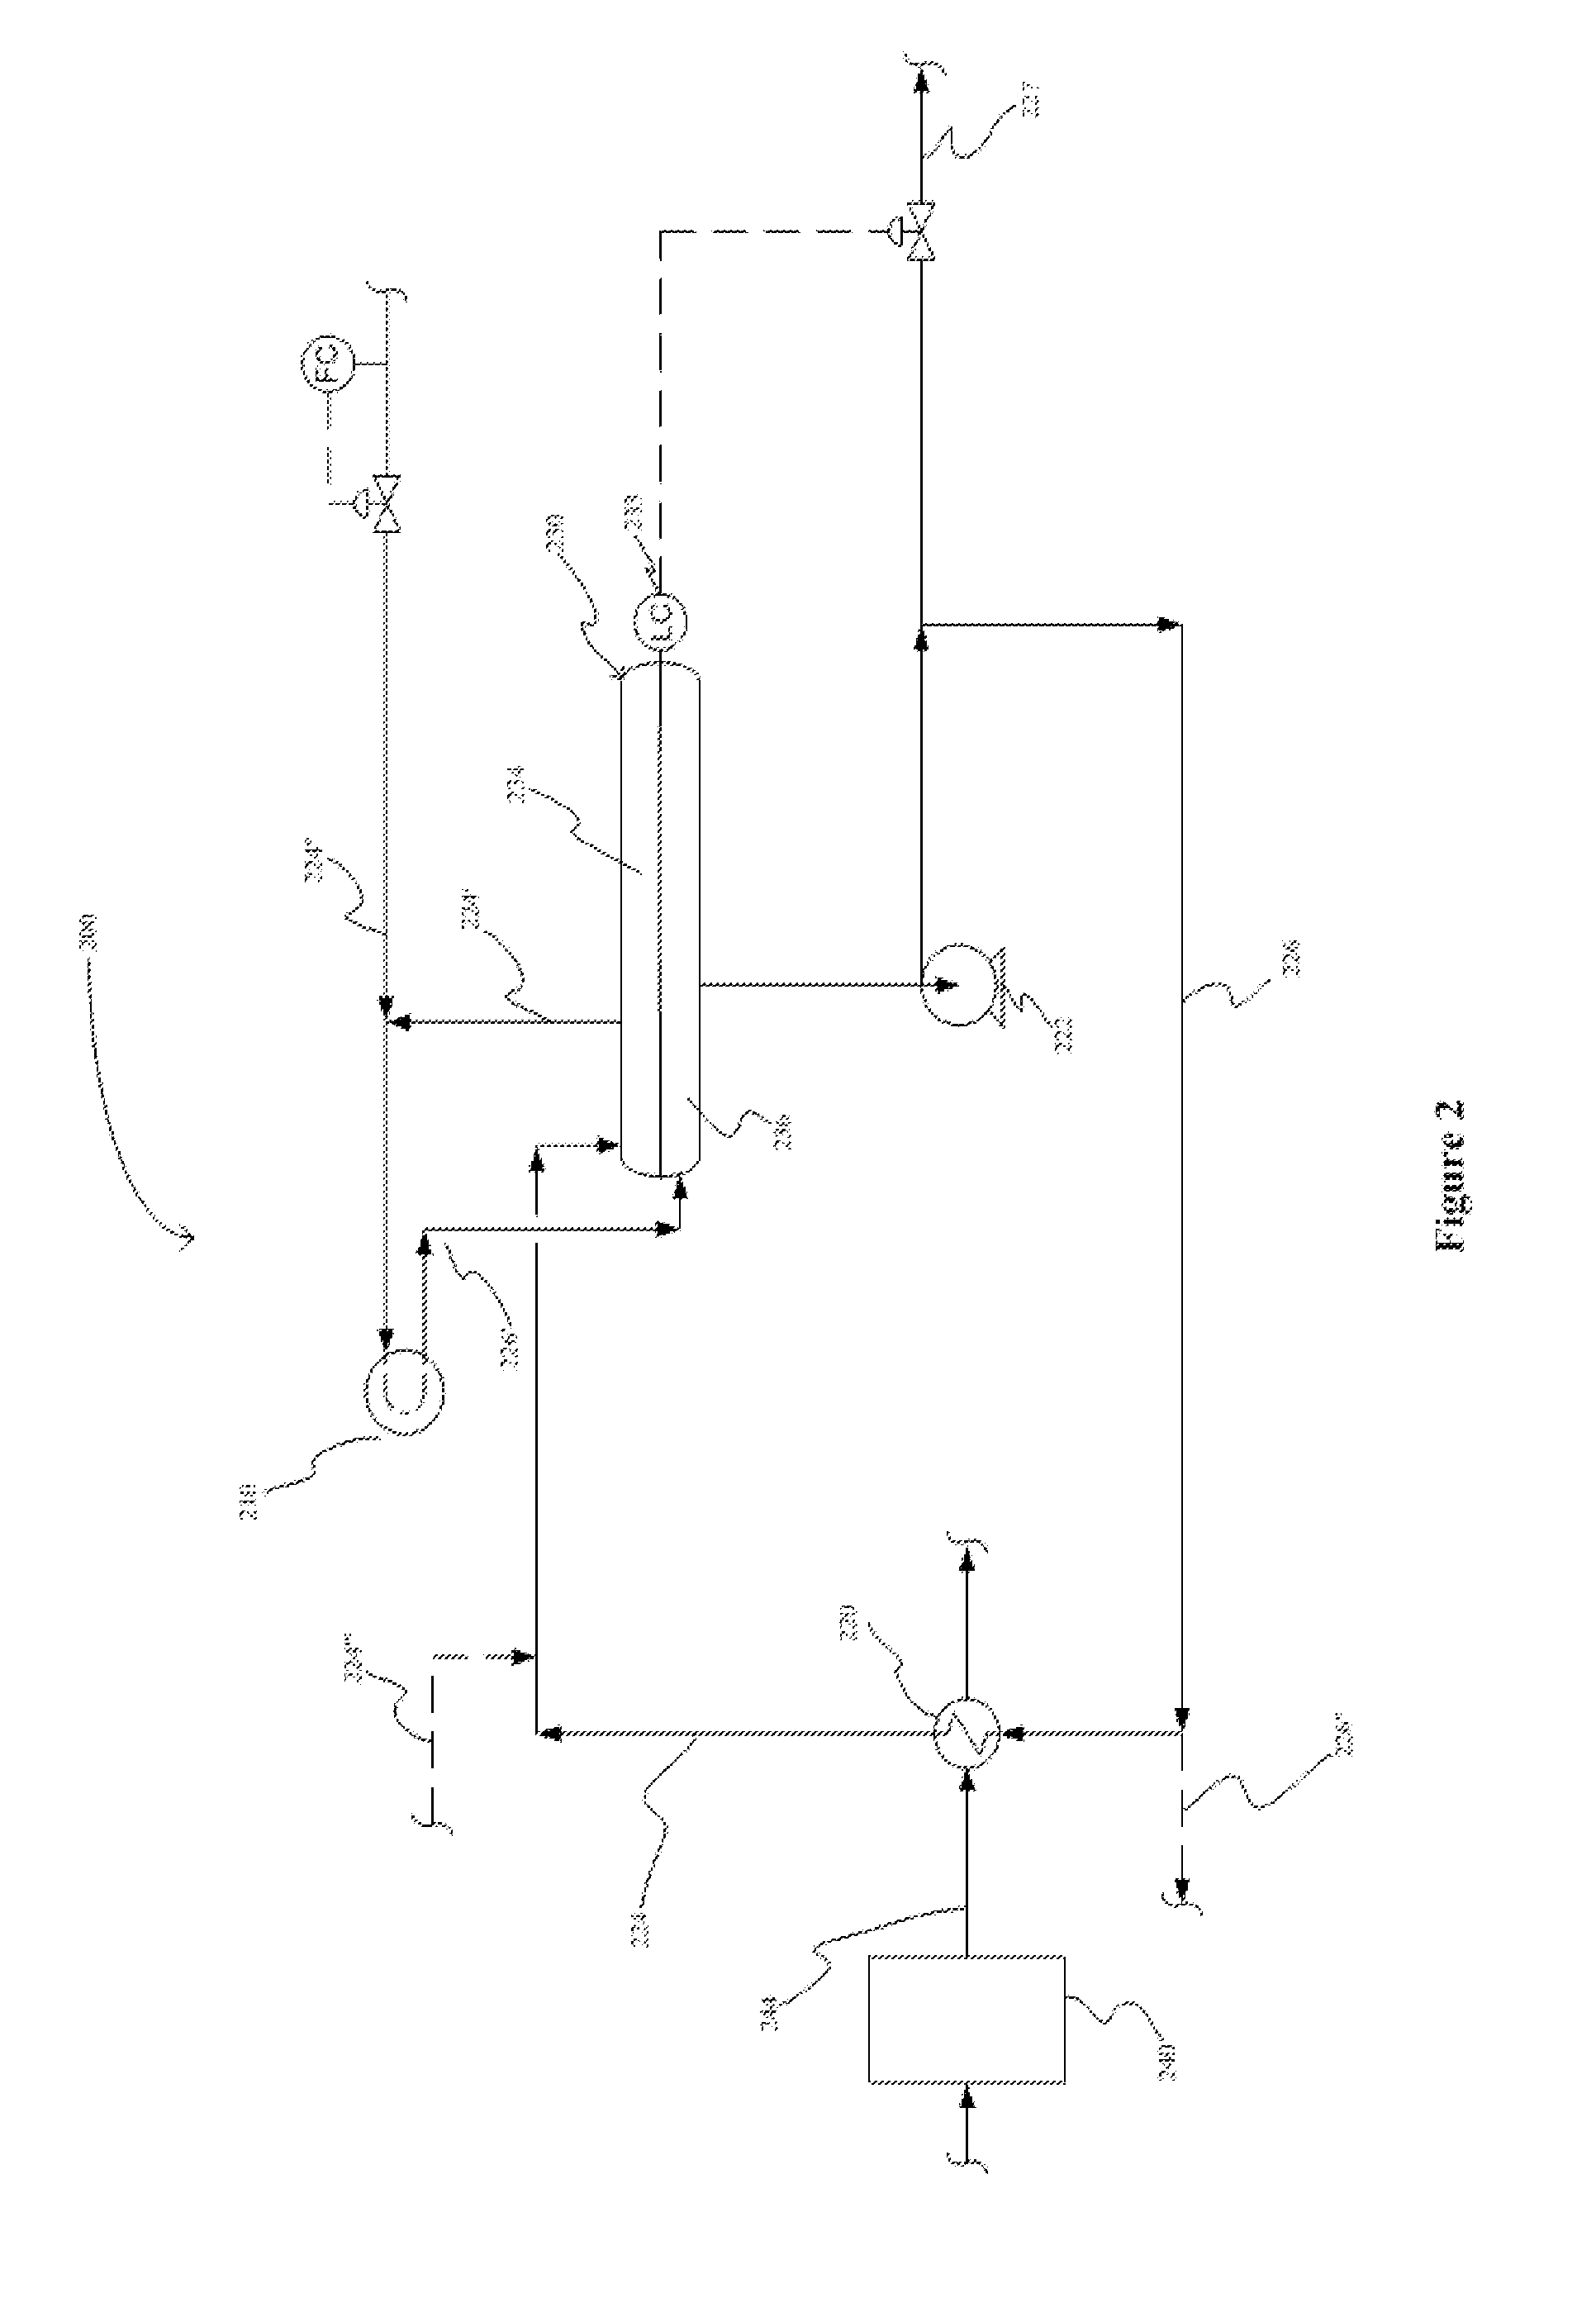 Configurations and methods of generating low-pressure steam